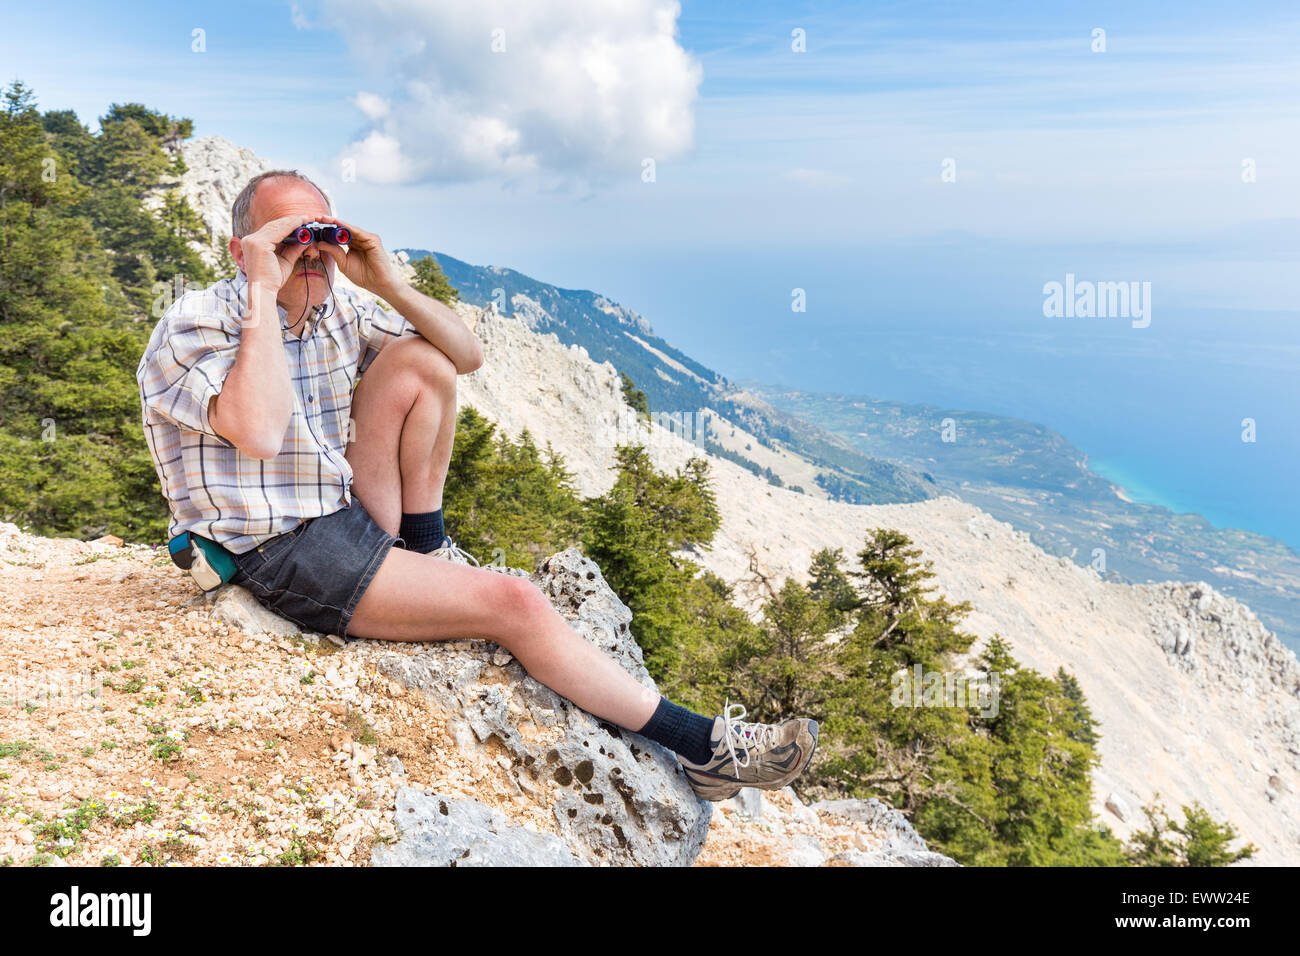 European middle aged man sitting on rock in mountains looking at landscape through binoculars Stock Photo